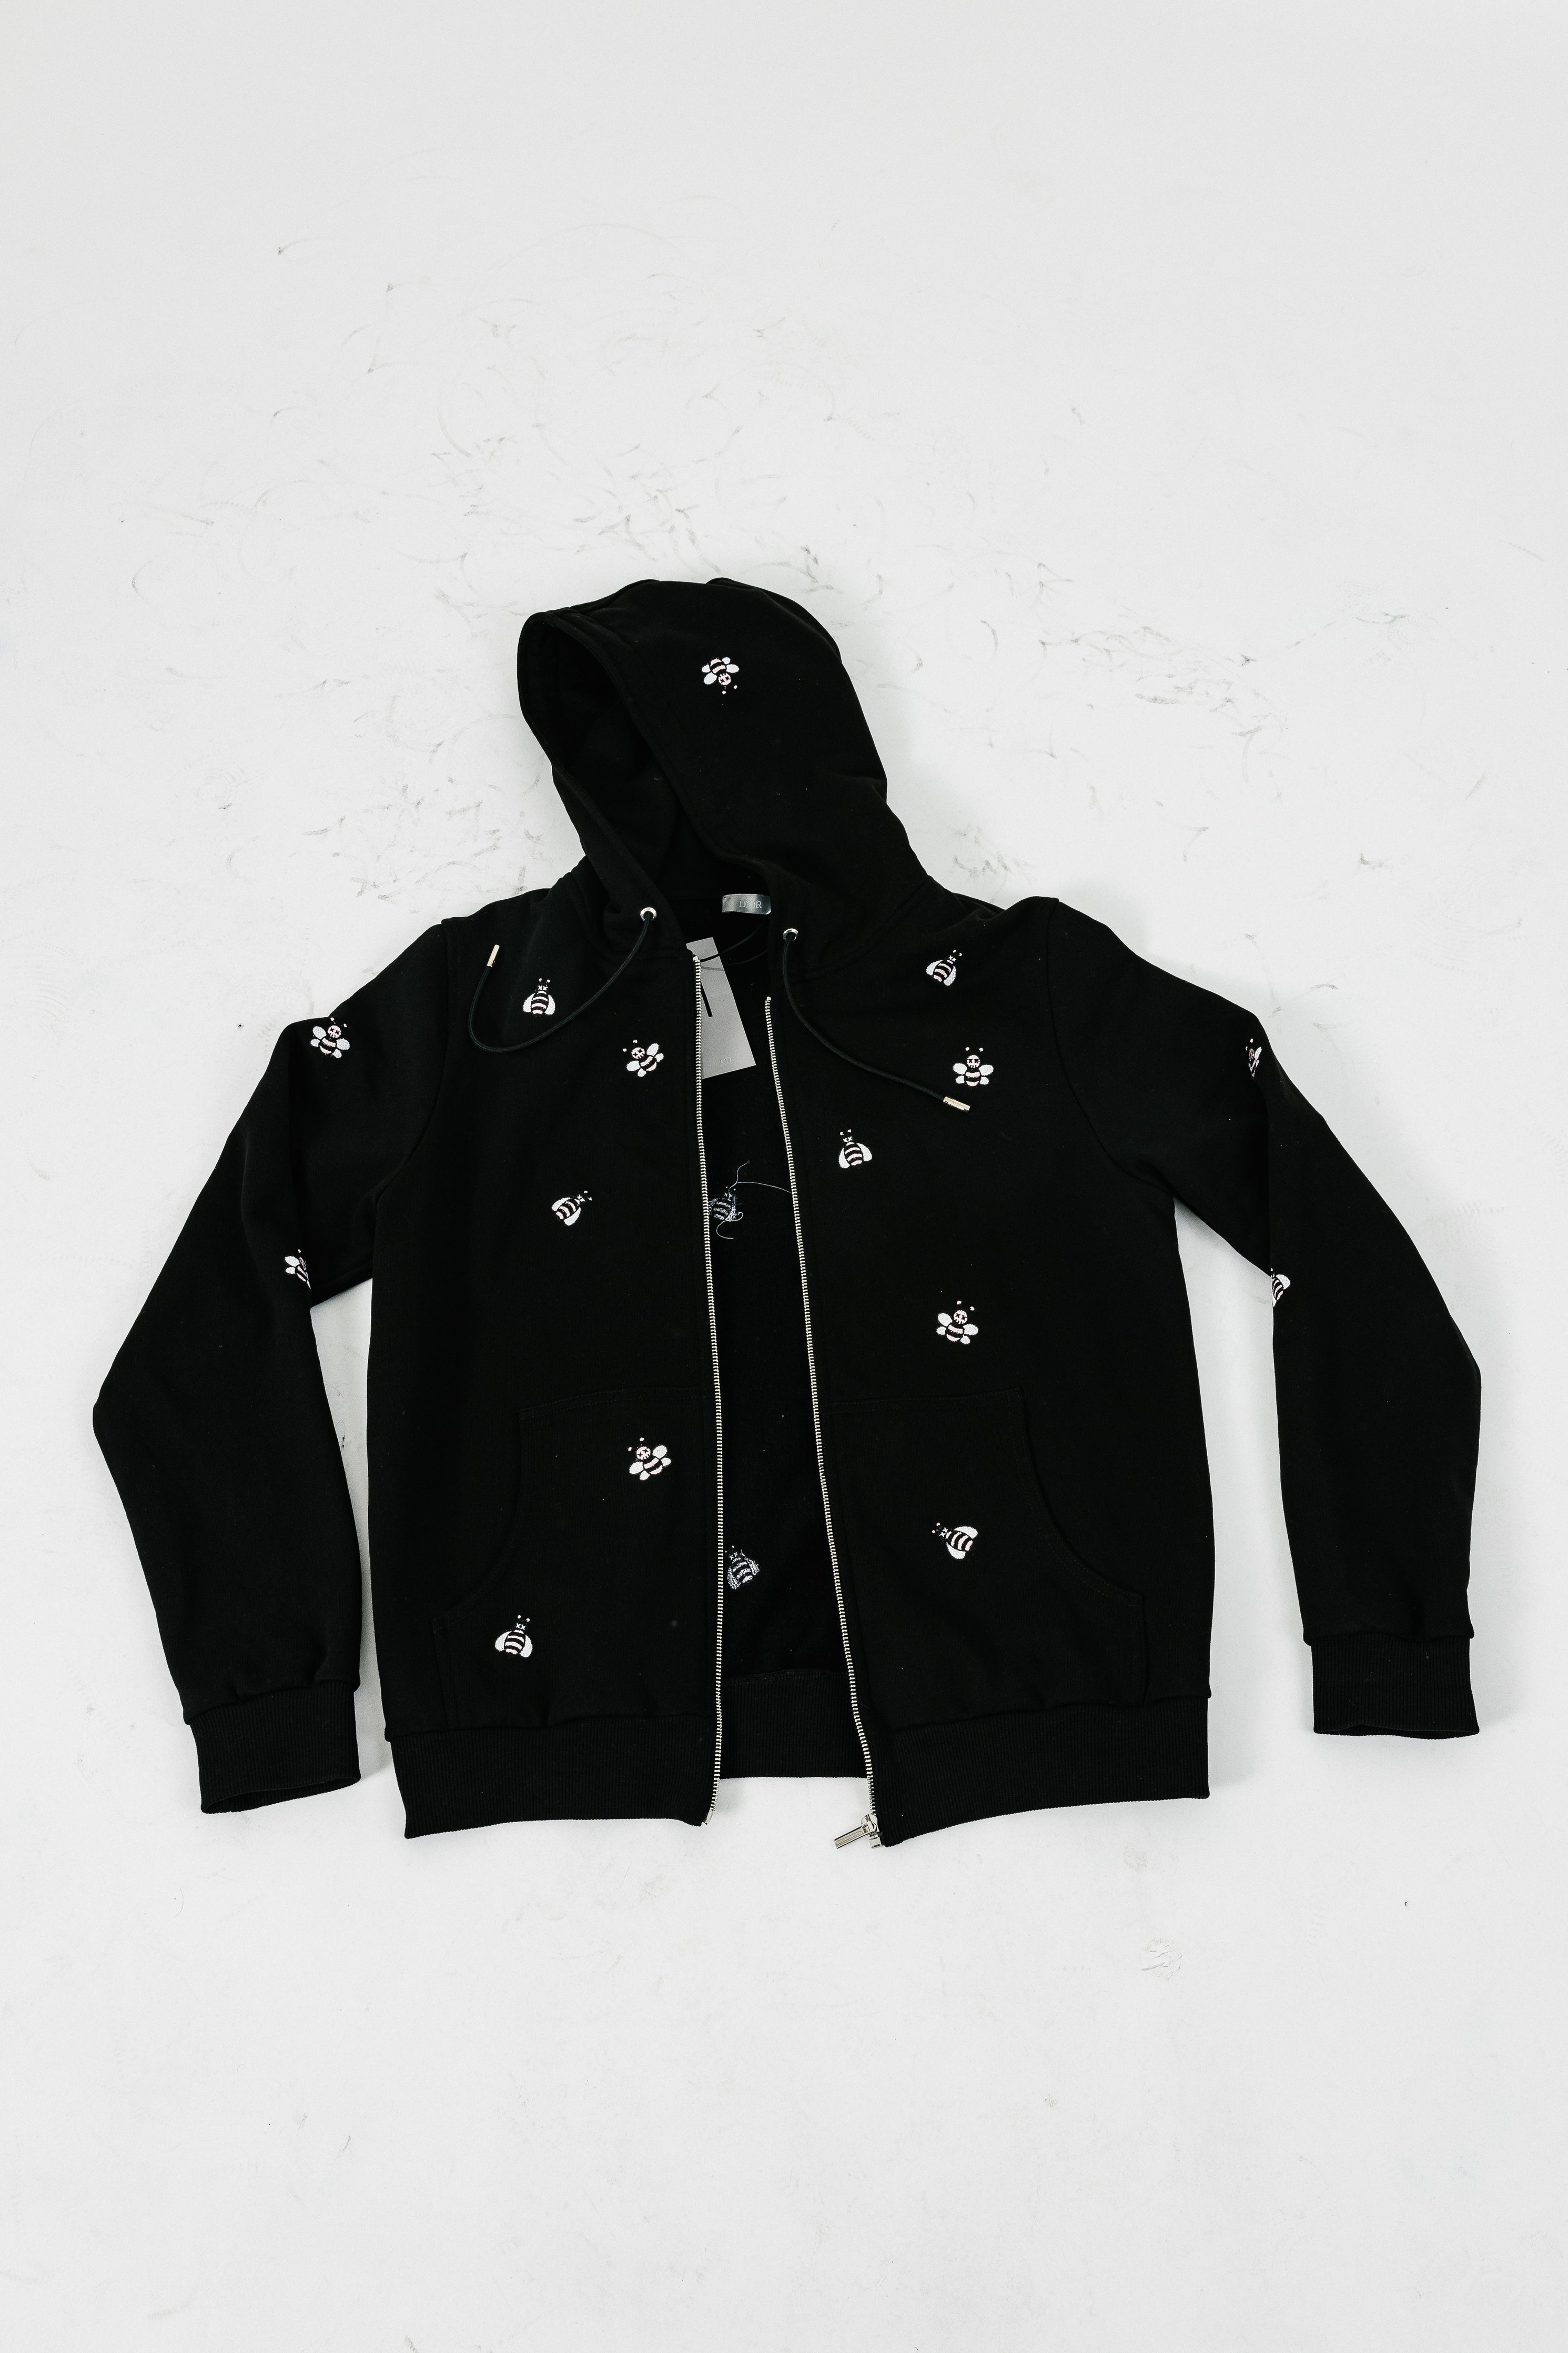 Dior x Kaws Embroidered Bees Zip Up Sweatshirt (fits like an L)